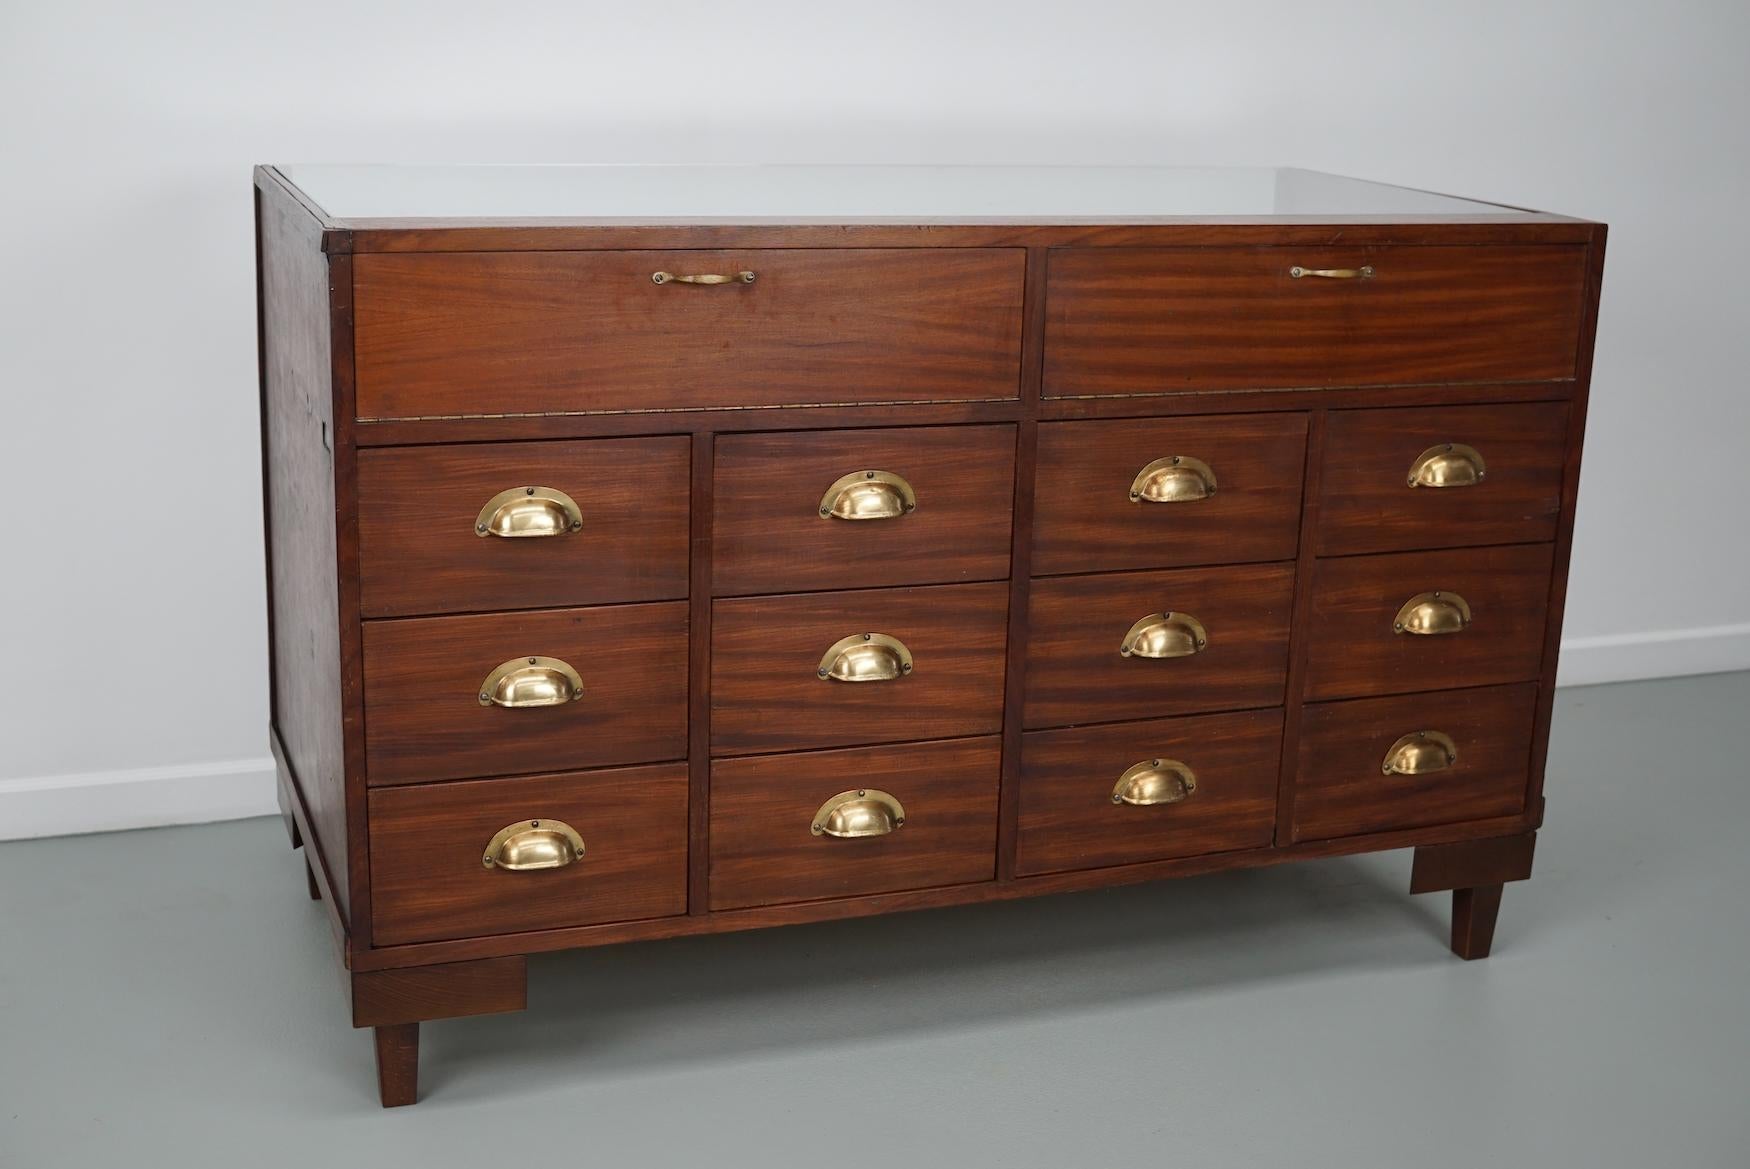 This vintage haberdashery shop counter dates from the 1950/60s and was made in Switzerland. It features a wooden frame, glass casing and drawers in solid mahogany and veneer with brass handles.